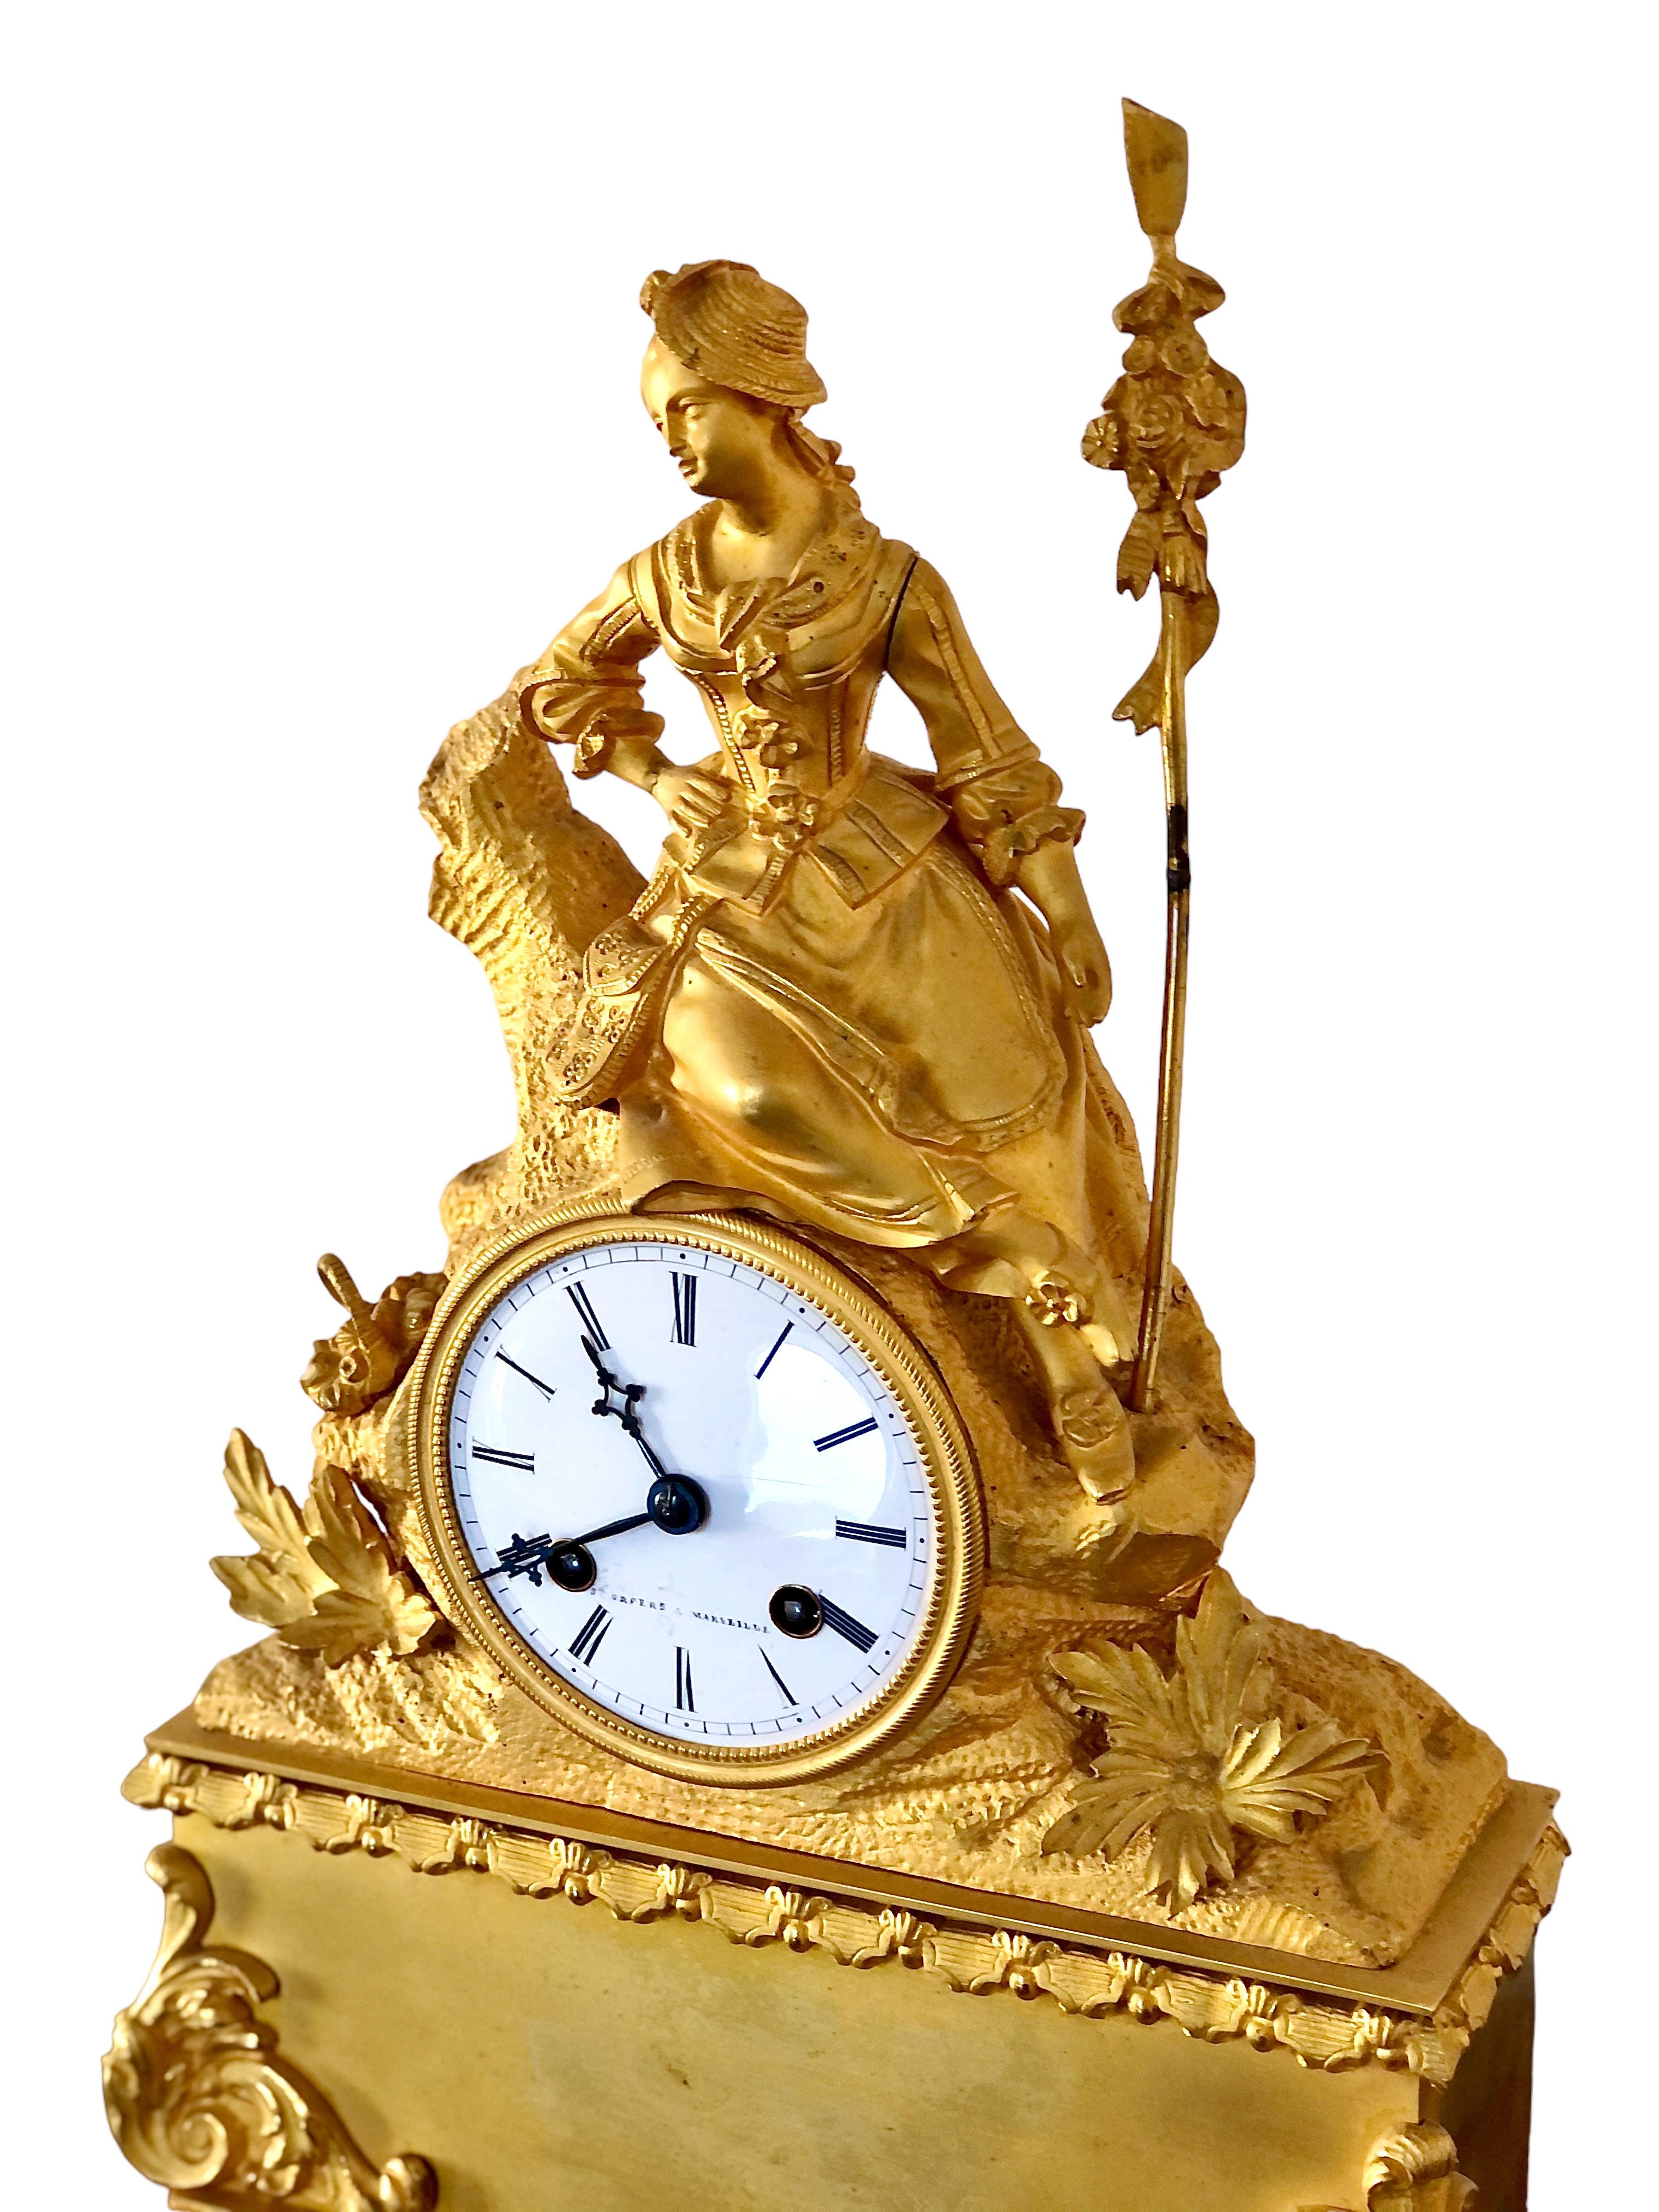 A superb quality 19th century French bronze gilt mantel clock, retaining its original glass dome, and adorned with a finely detailed rustic female figure in period dress, reclining on a tree stump surrounded by woodland leaves at its base. Caught in